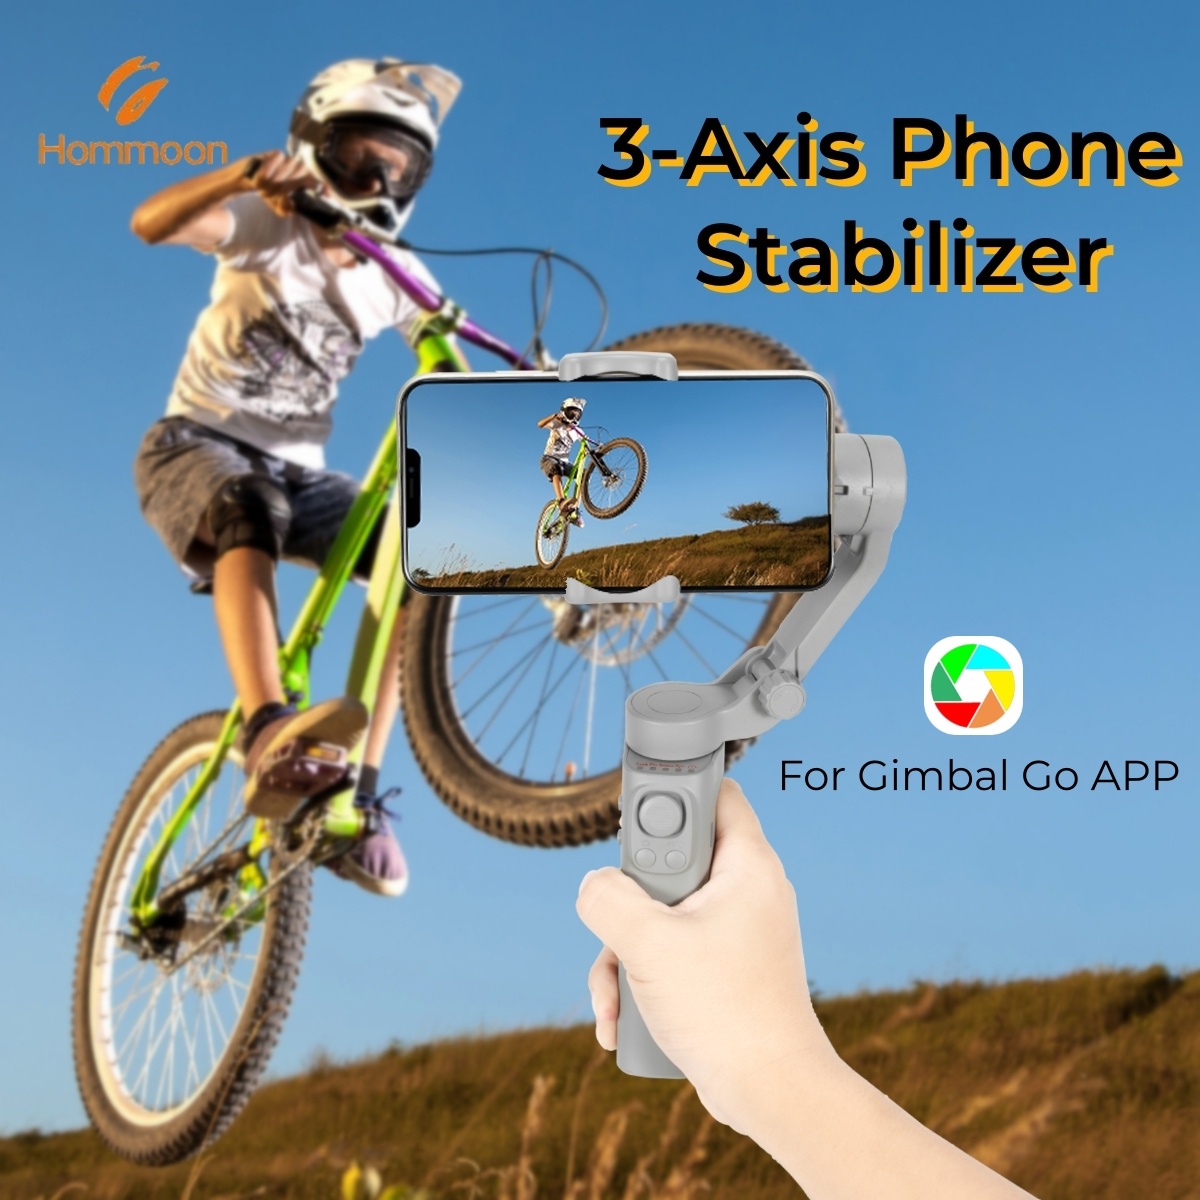 Gimbal Stabilizer For Smartphone, 3-axis Phone Stabilizer With Tripod,  Foldable Phone Gimbal For Android And Phone, Phone Stabilizer For Video  Recording With Face/object Tracking, Vlogging Kit, Portable Stabilizer,  Live Streaming Device